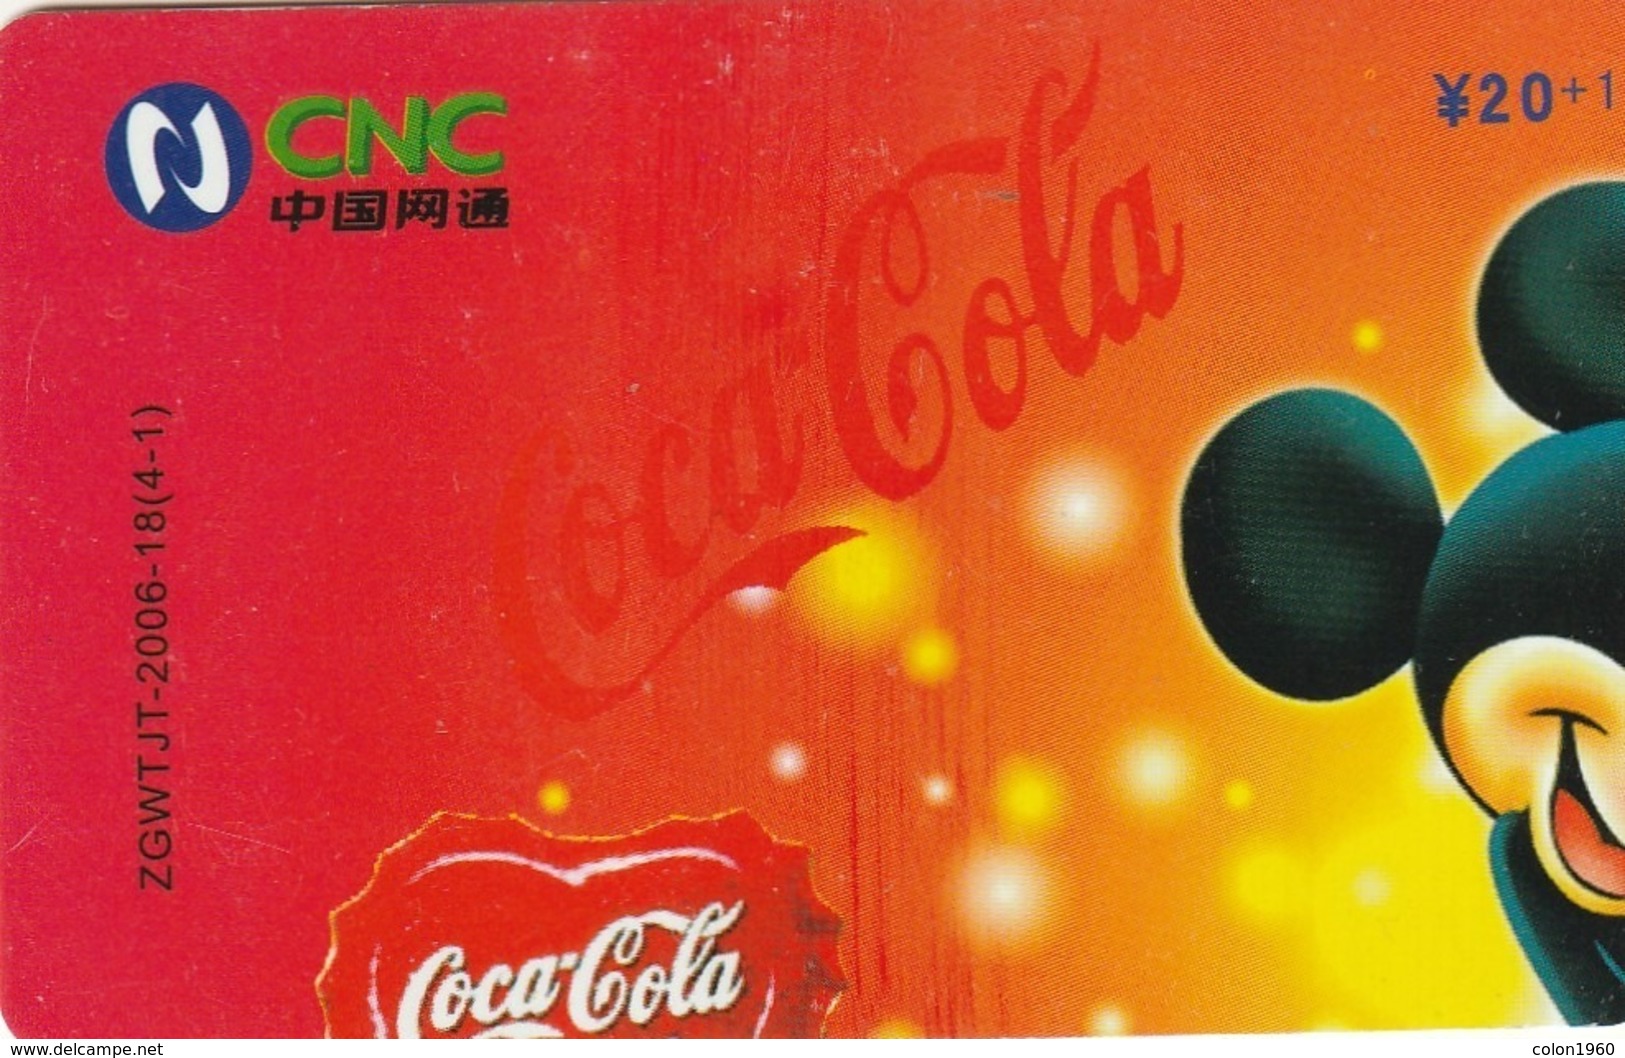 CHINA. DISNEY, COCACOLA. MICKEY MOUSE. ZGWTJT-2006-18(4-1). (150). - Puzzles